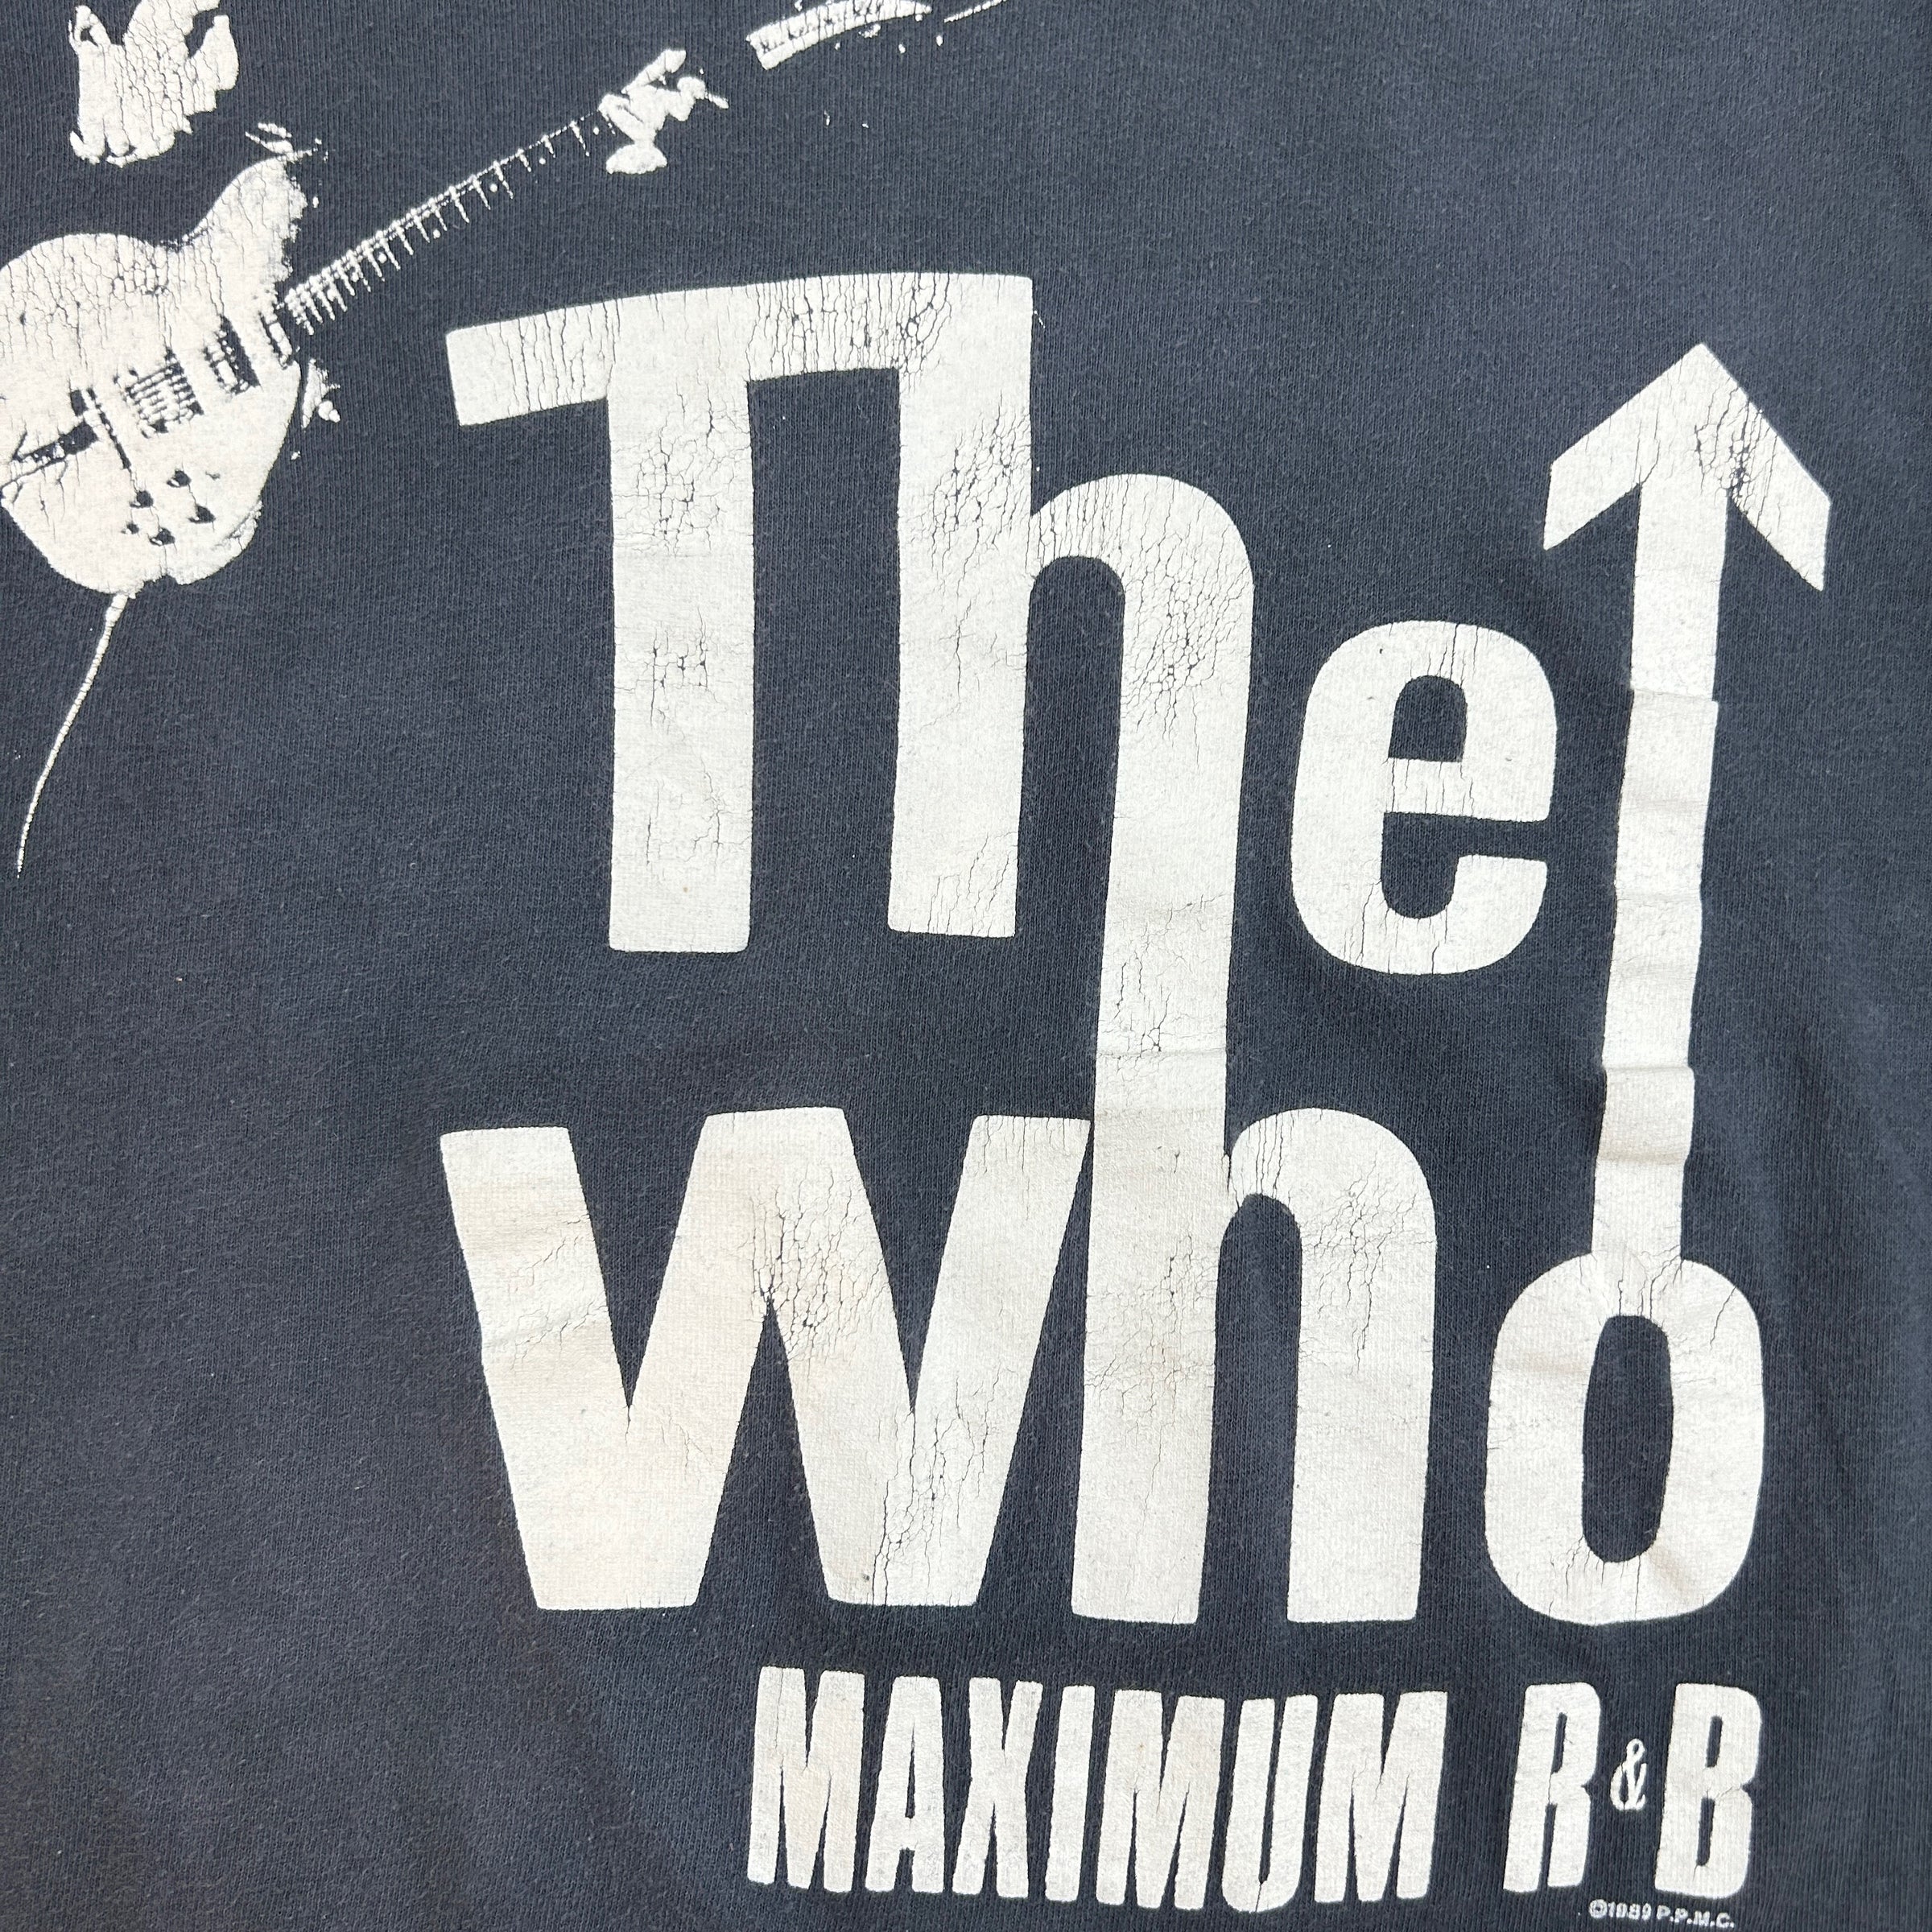 1989 Washed Navy The Who Tour T-Shirt